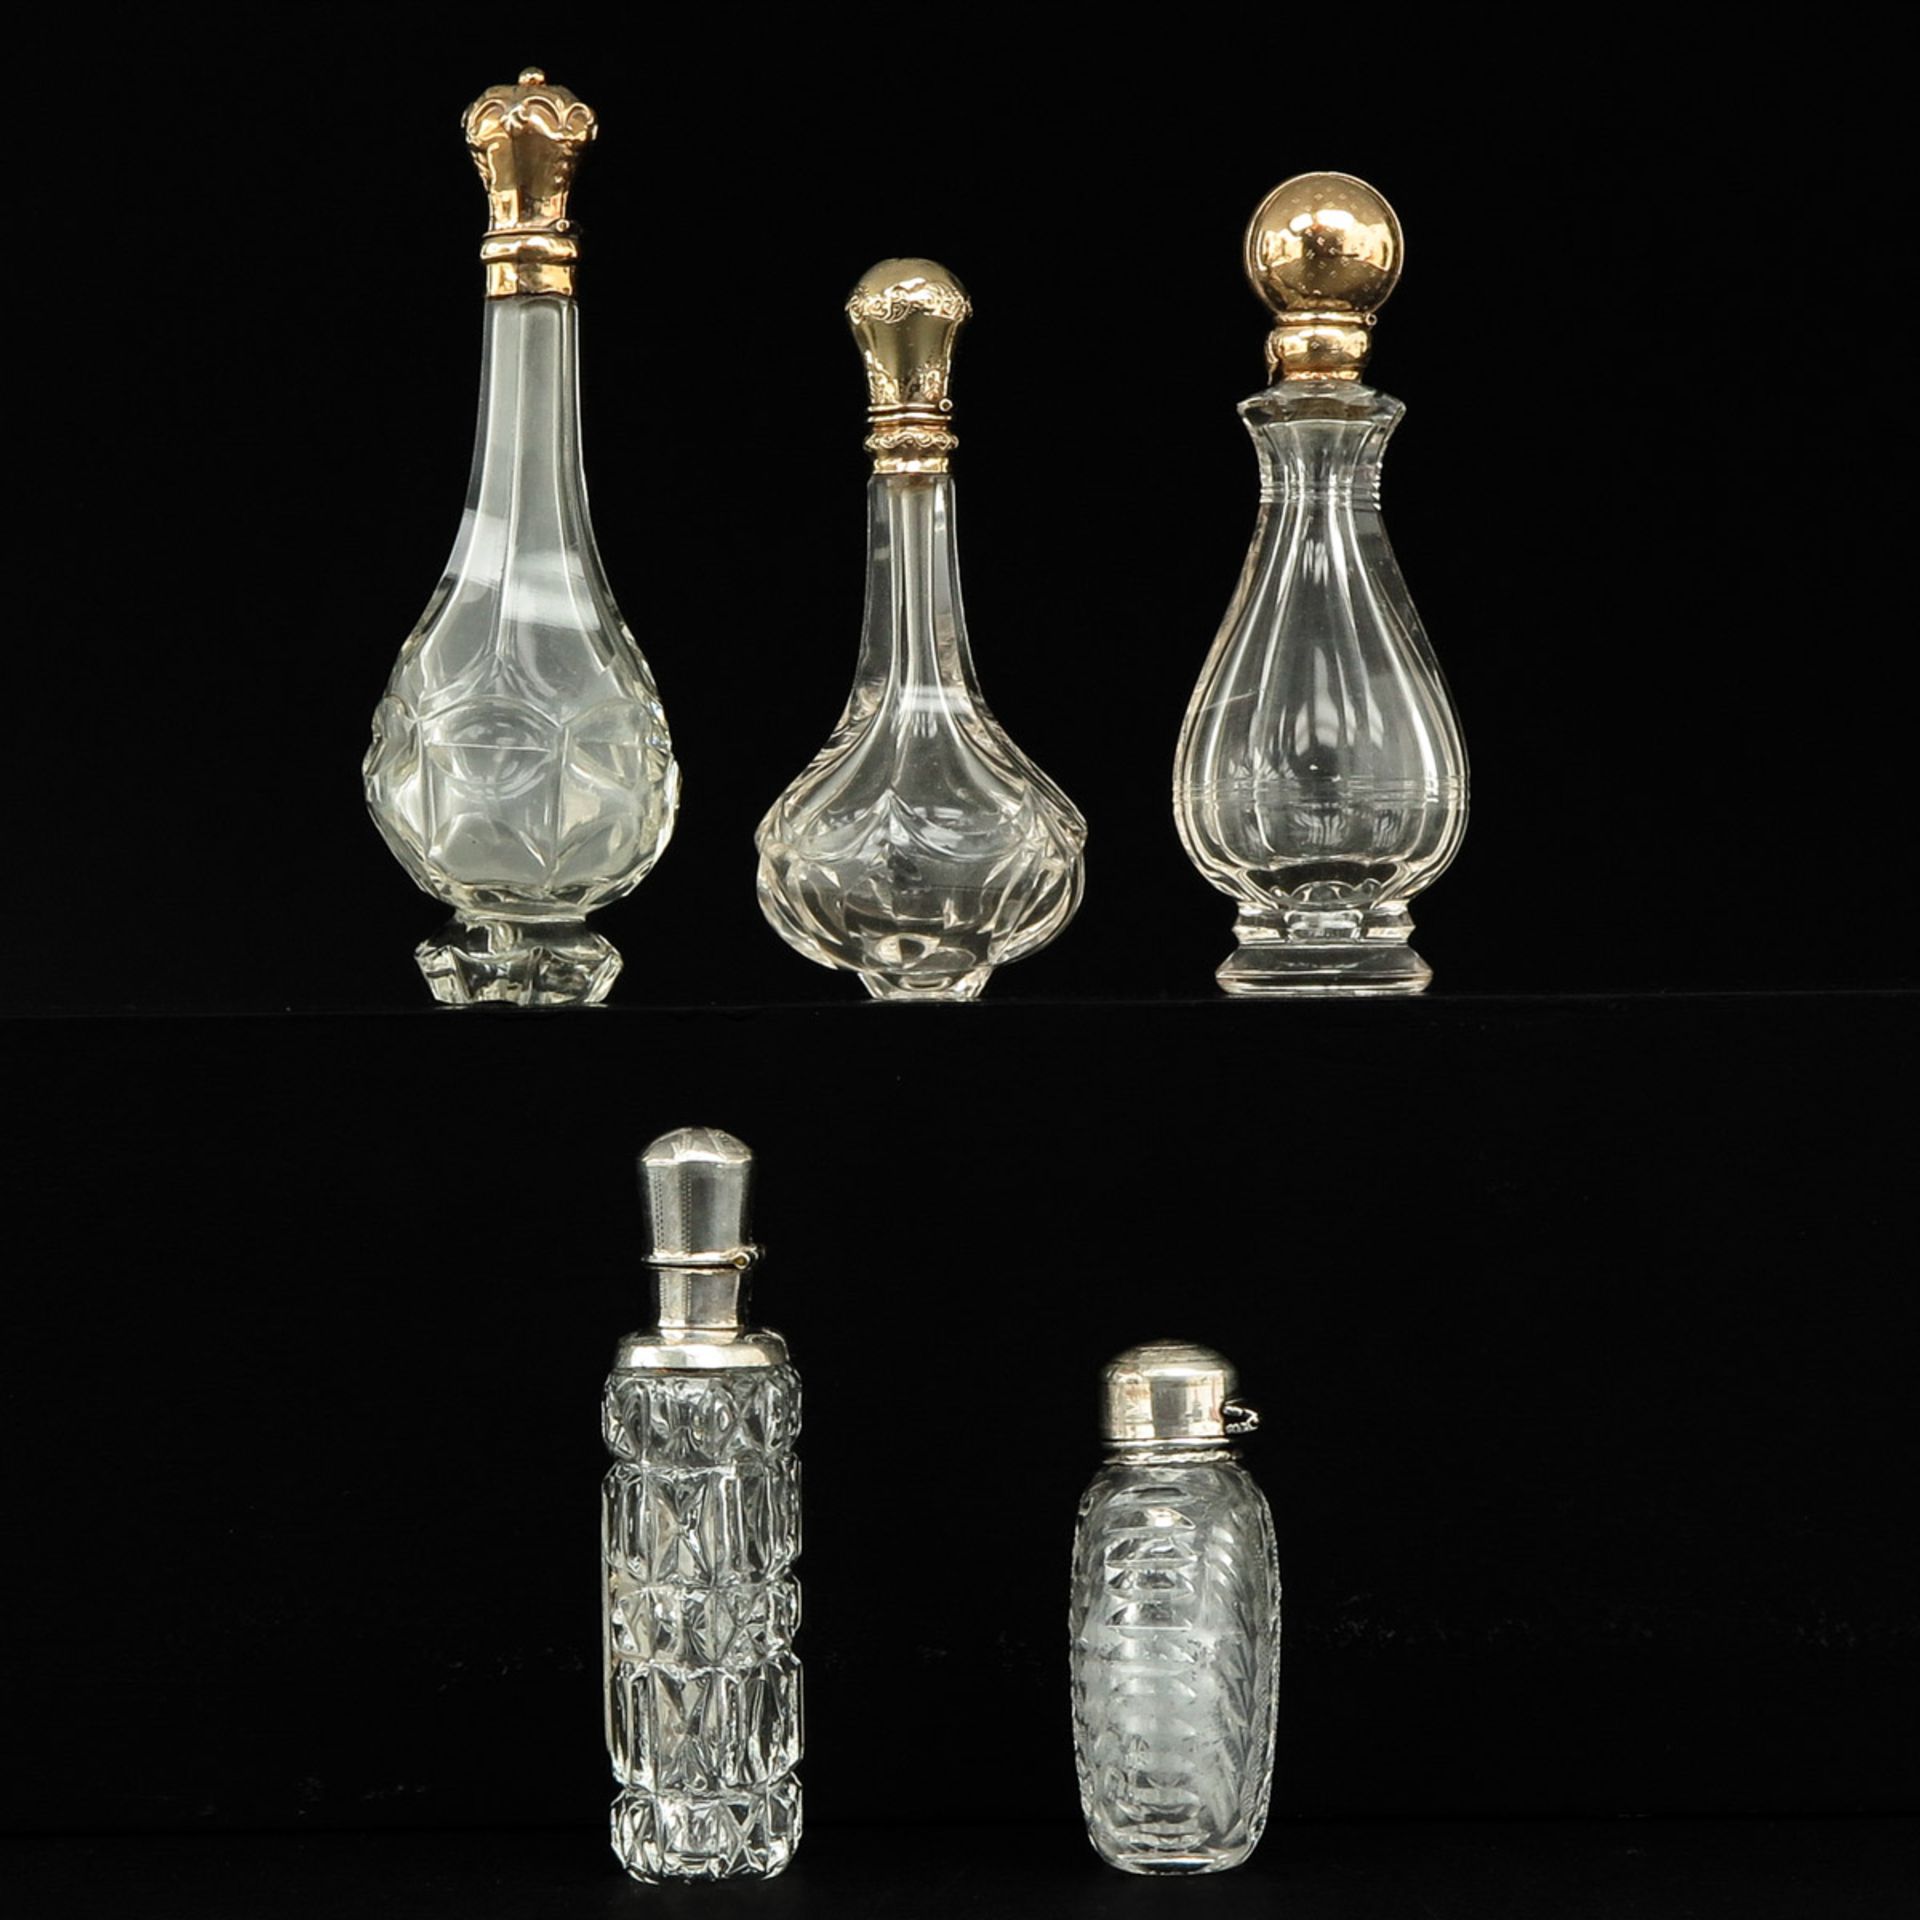 A Collection of 5 Perfume Bottles - Image 2 of 9